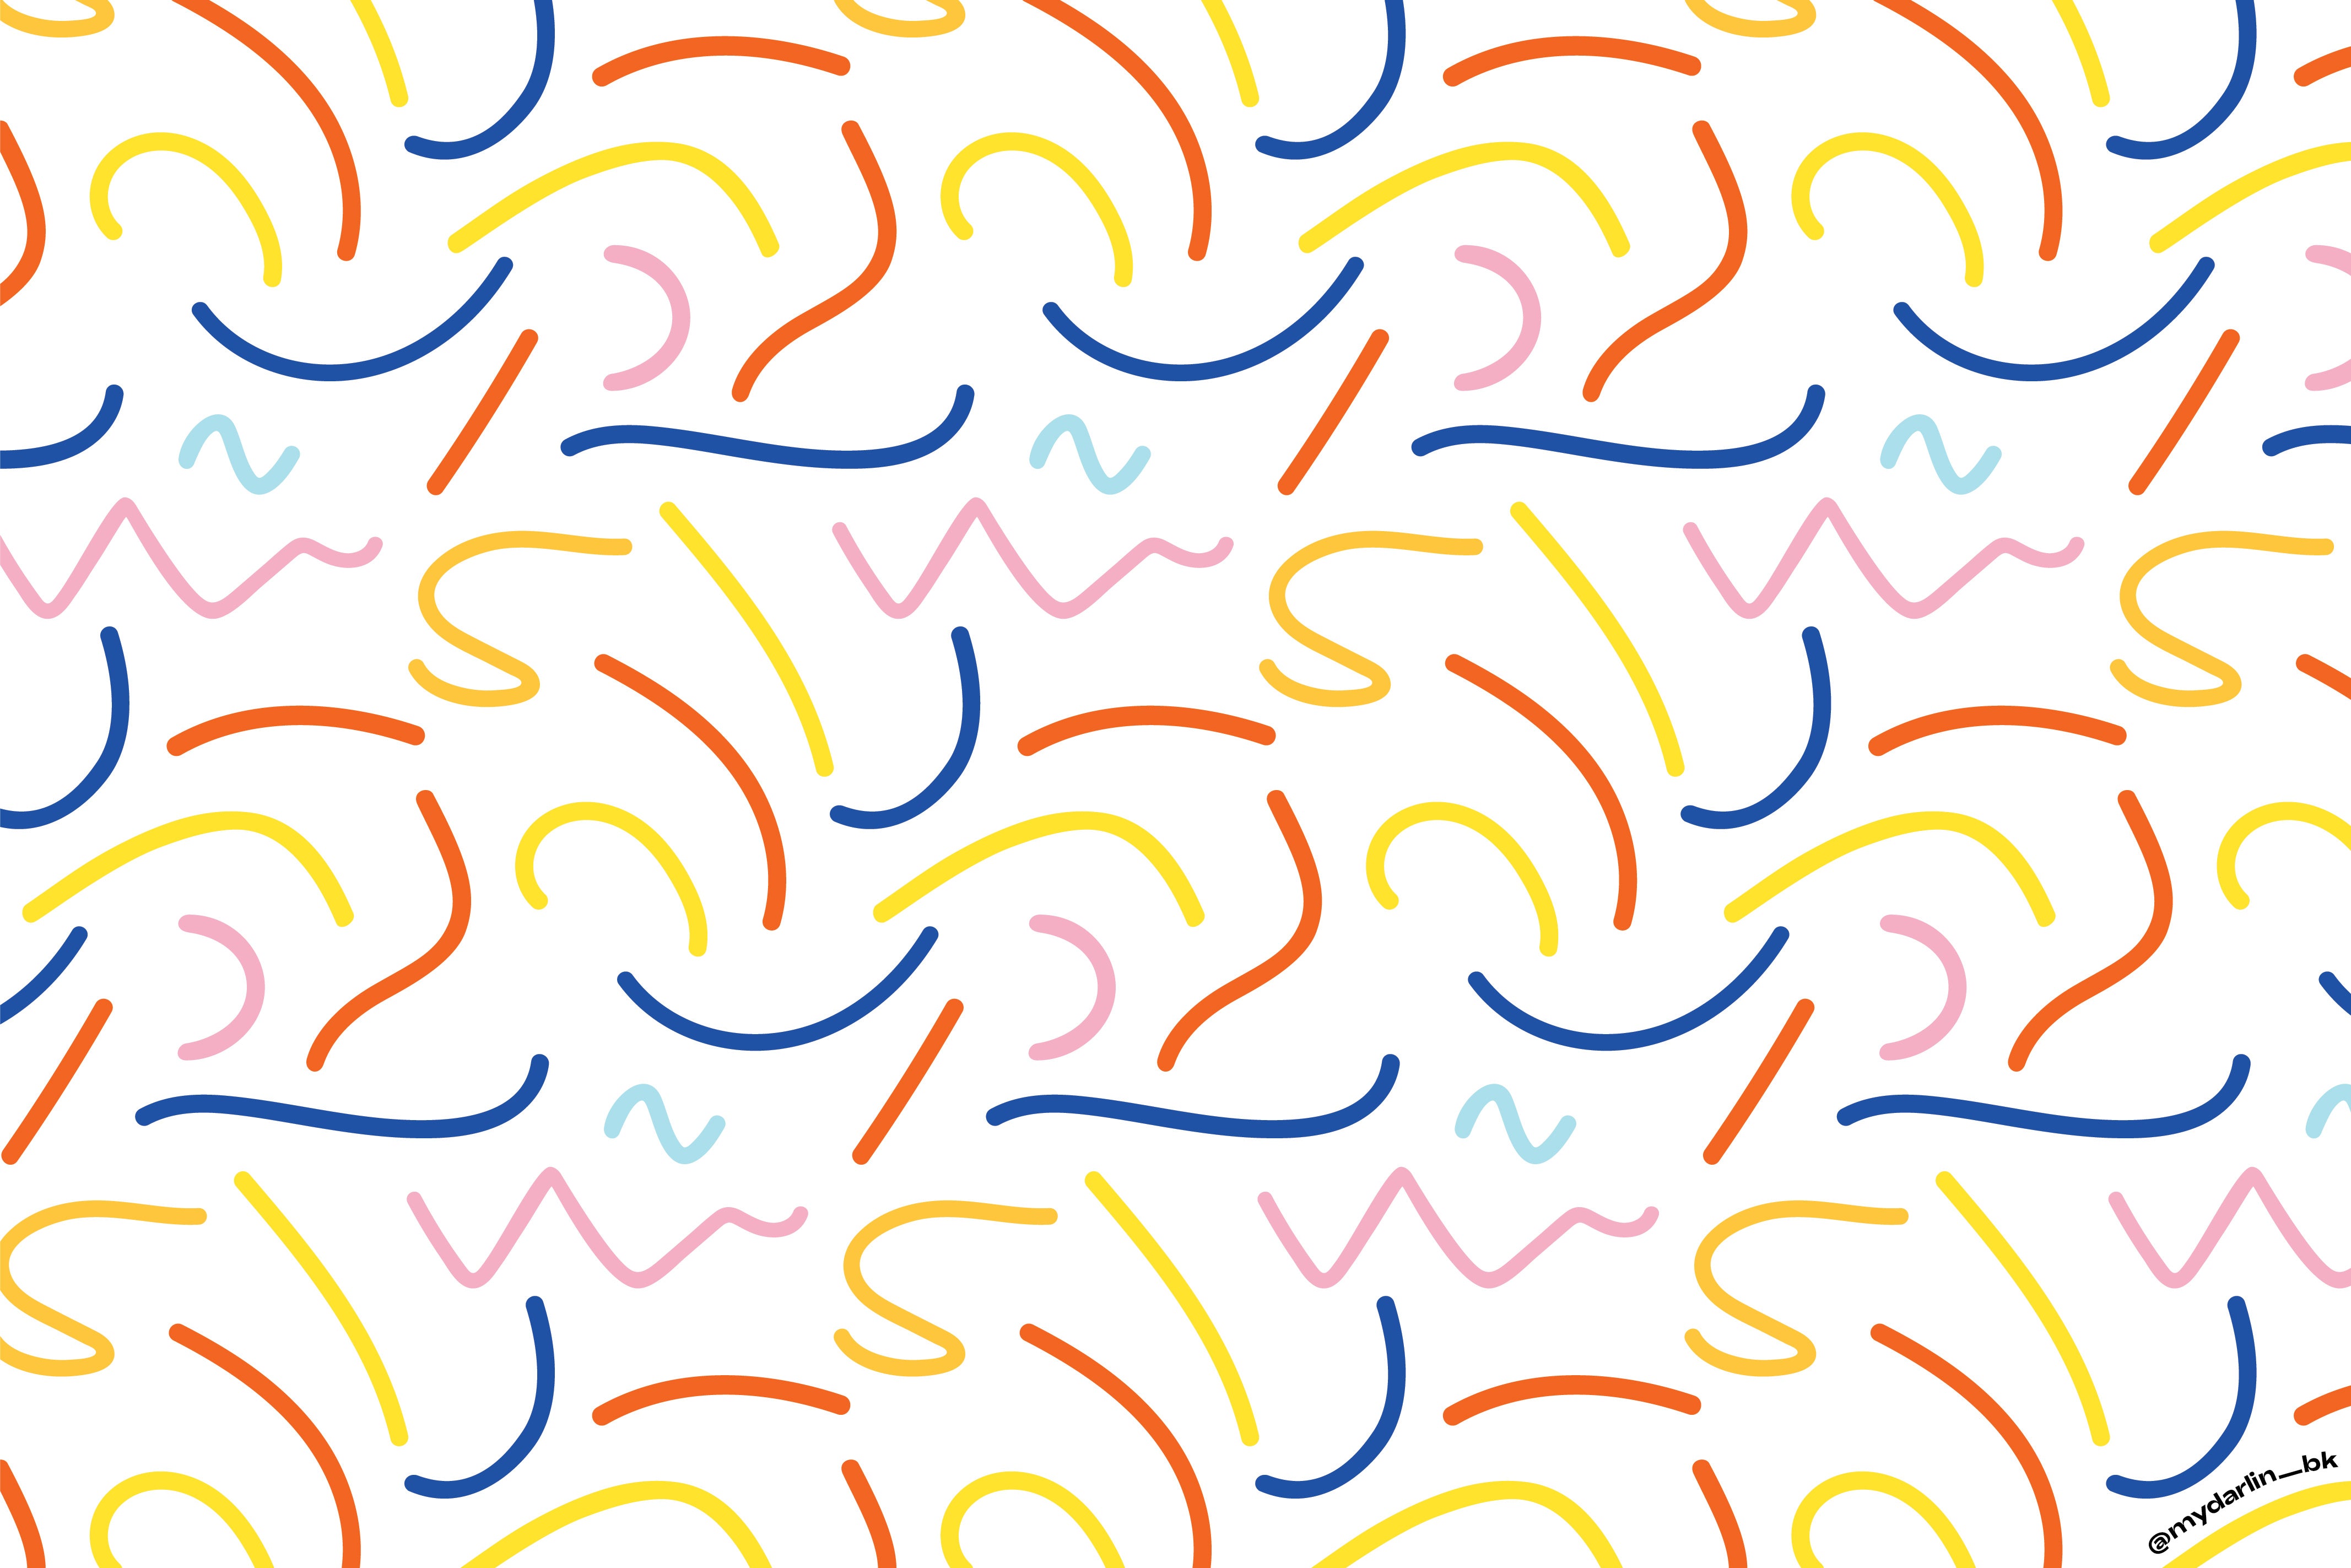 "Squiggle Party" squiggly shapes pattern free downloadable device wallpaper to brighten up your devices by @mydarlin_bk